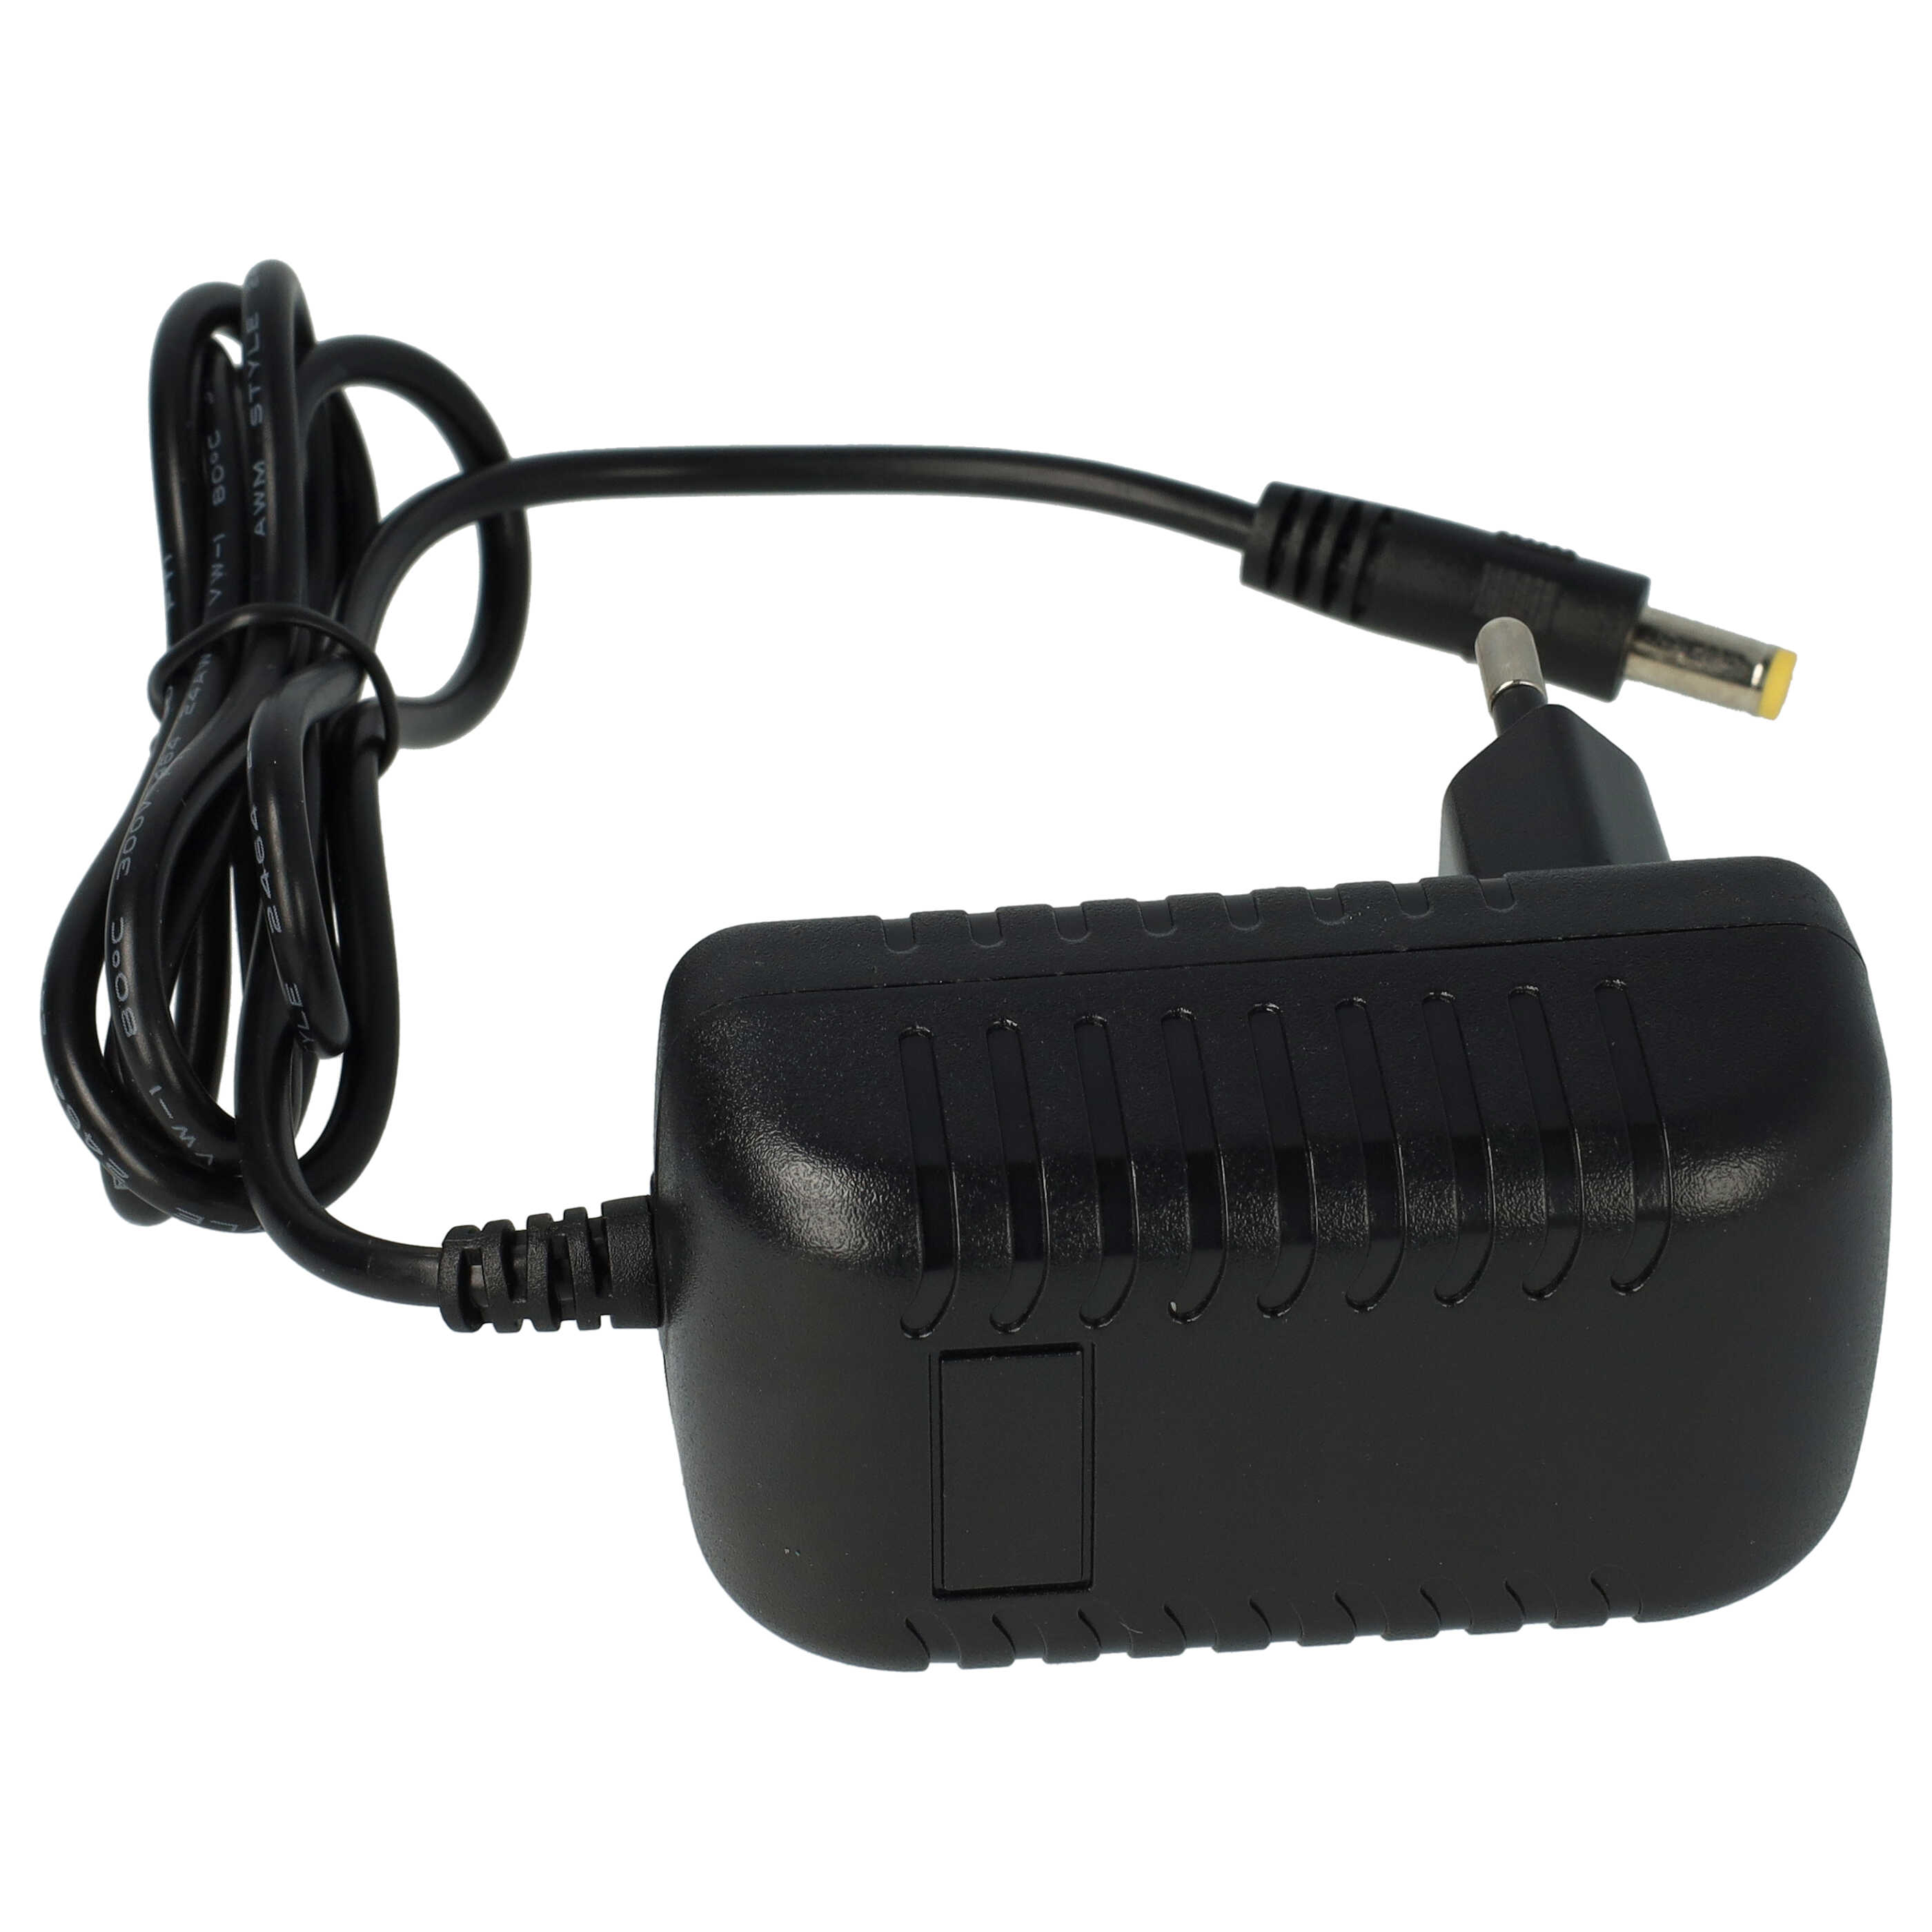 Mains Power Adapter suitable for 803a Vodafone speakers, router, hard drive etc. - 115 cm